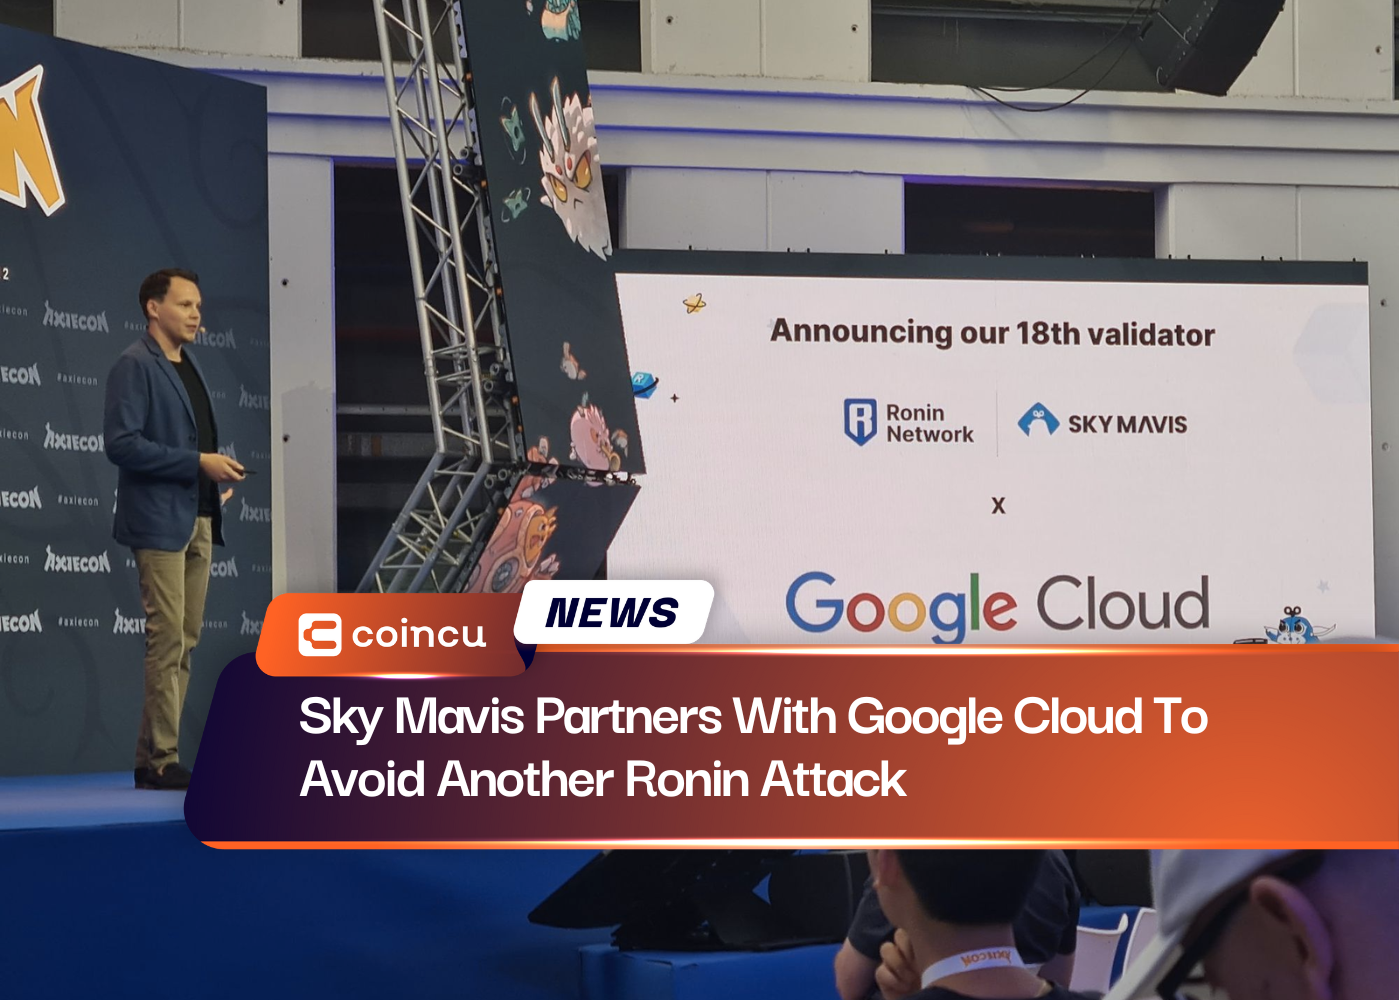 Sky Mavis Partners With Google Cloud To Avoid Another Ronin Attack